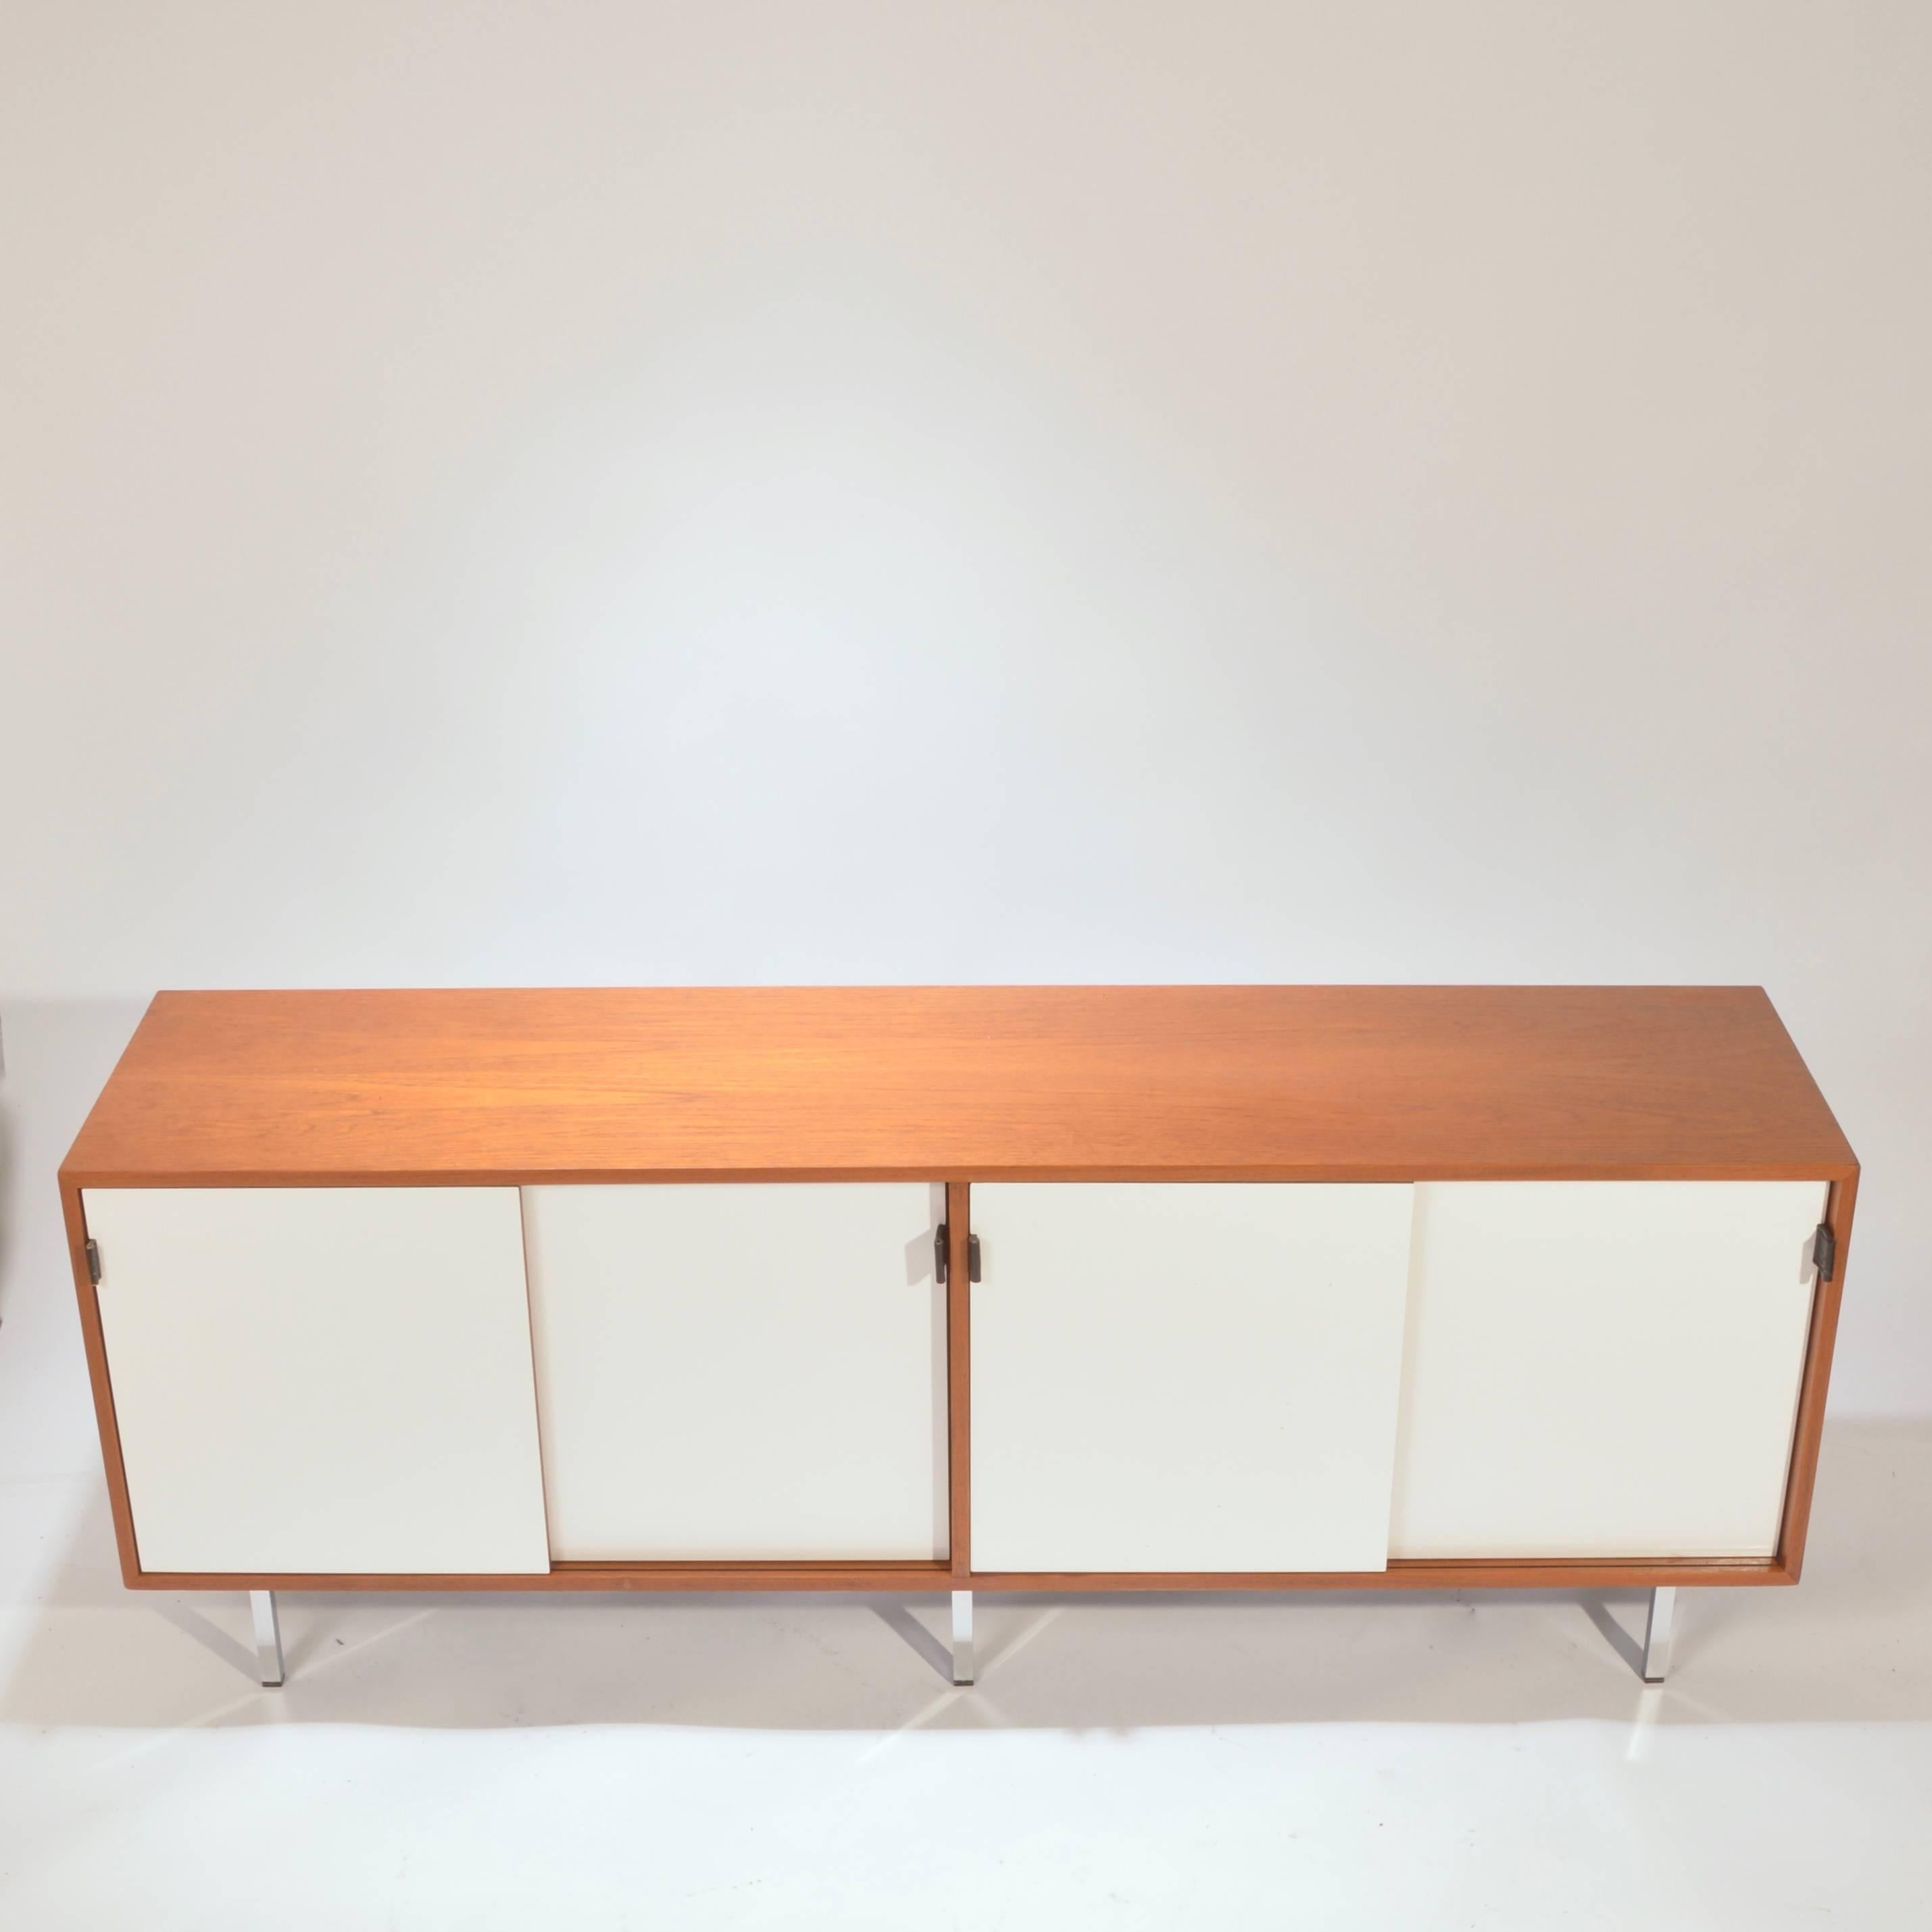 Early and Rare Florence Knoll Credenza in Teak and White Formica 1